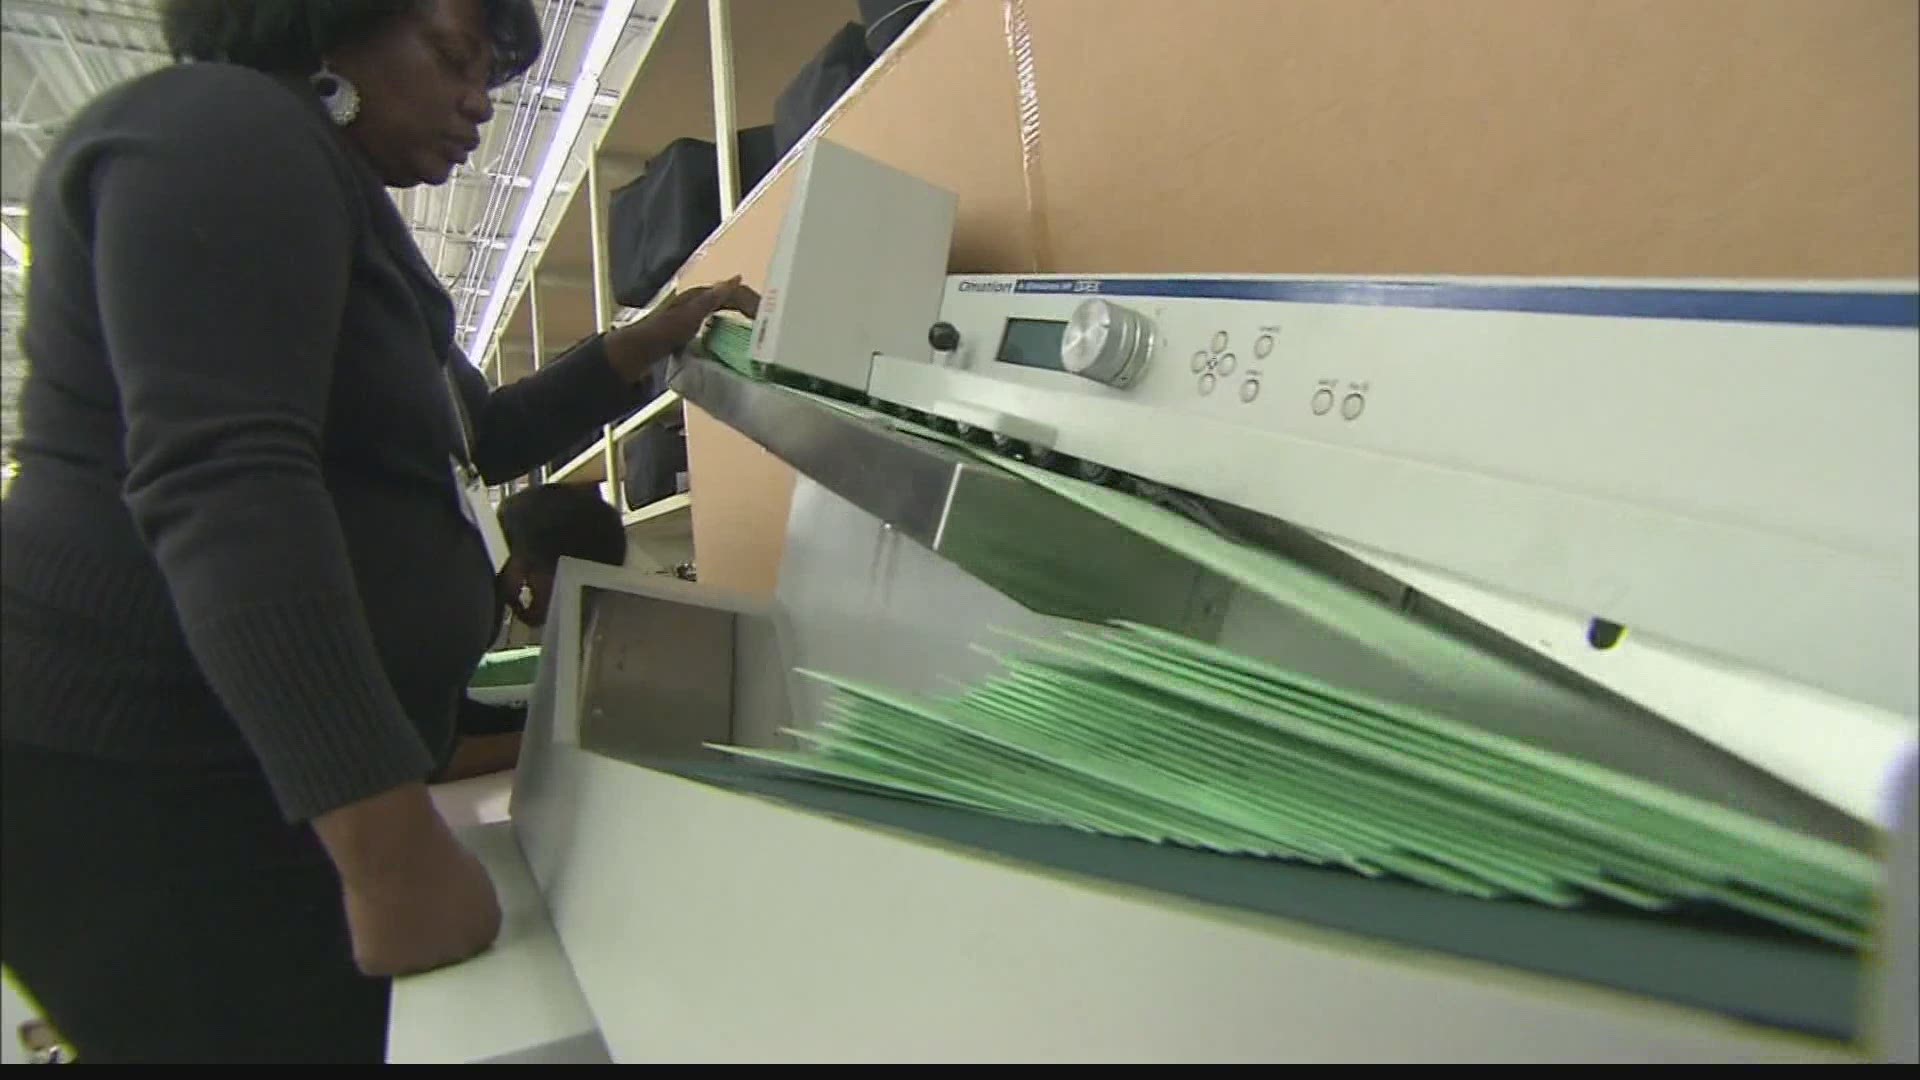 A record number of Americans are expected to vote by mail this year due to the pandemic and this has raised concern for voters who are visually impaired.